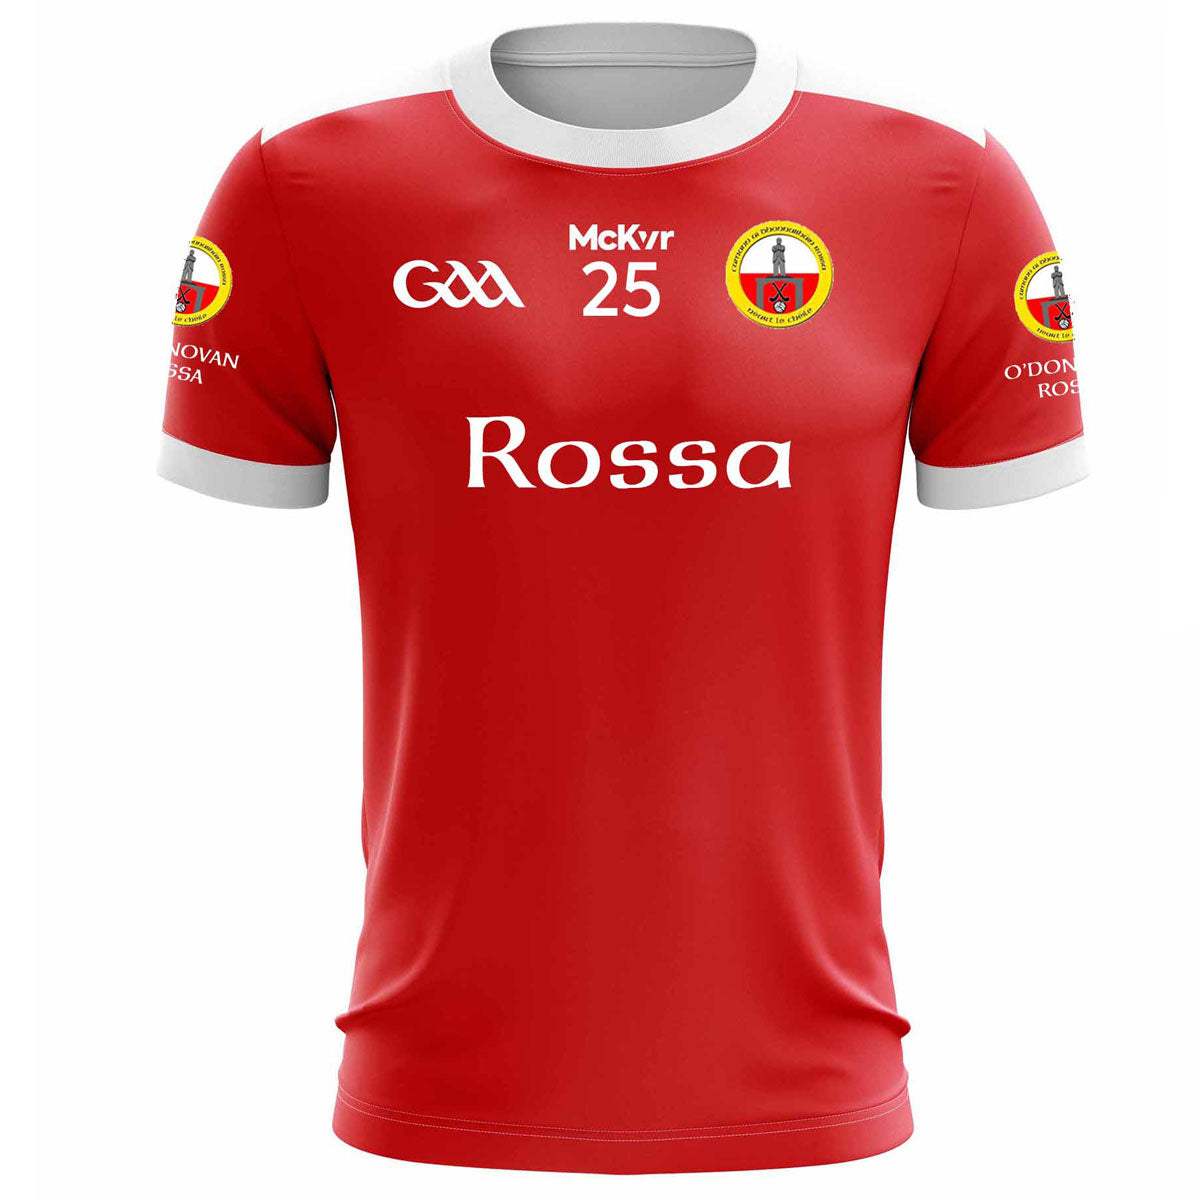 Mc Keever O'Donovan Rossa GAA Numbered Playing Jersey - Womens - Red/White